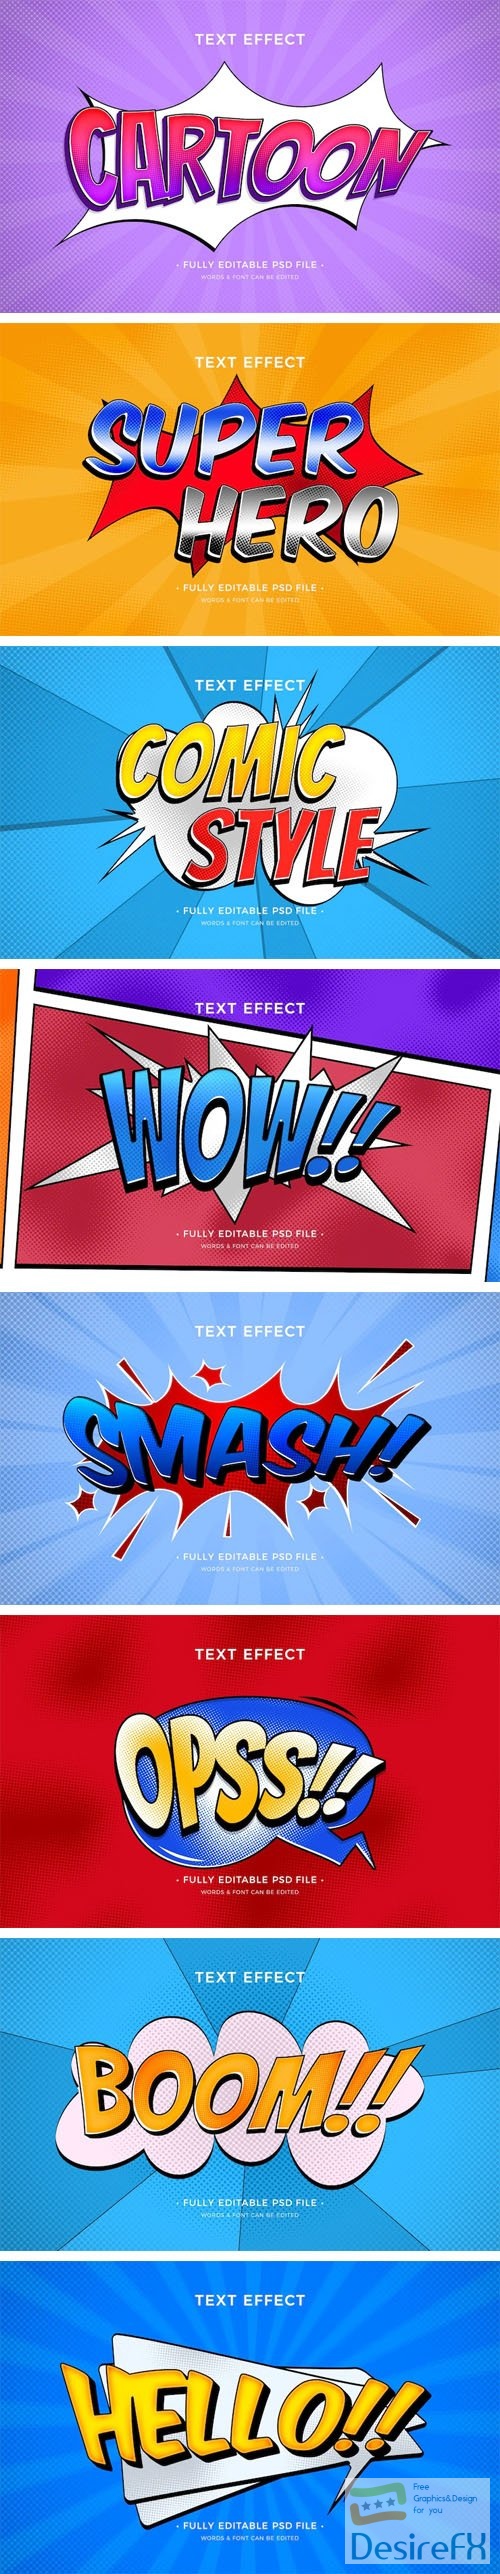 Awesome Cartoon Comic Text Effects for Photoshop